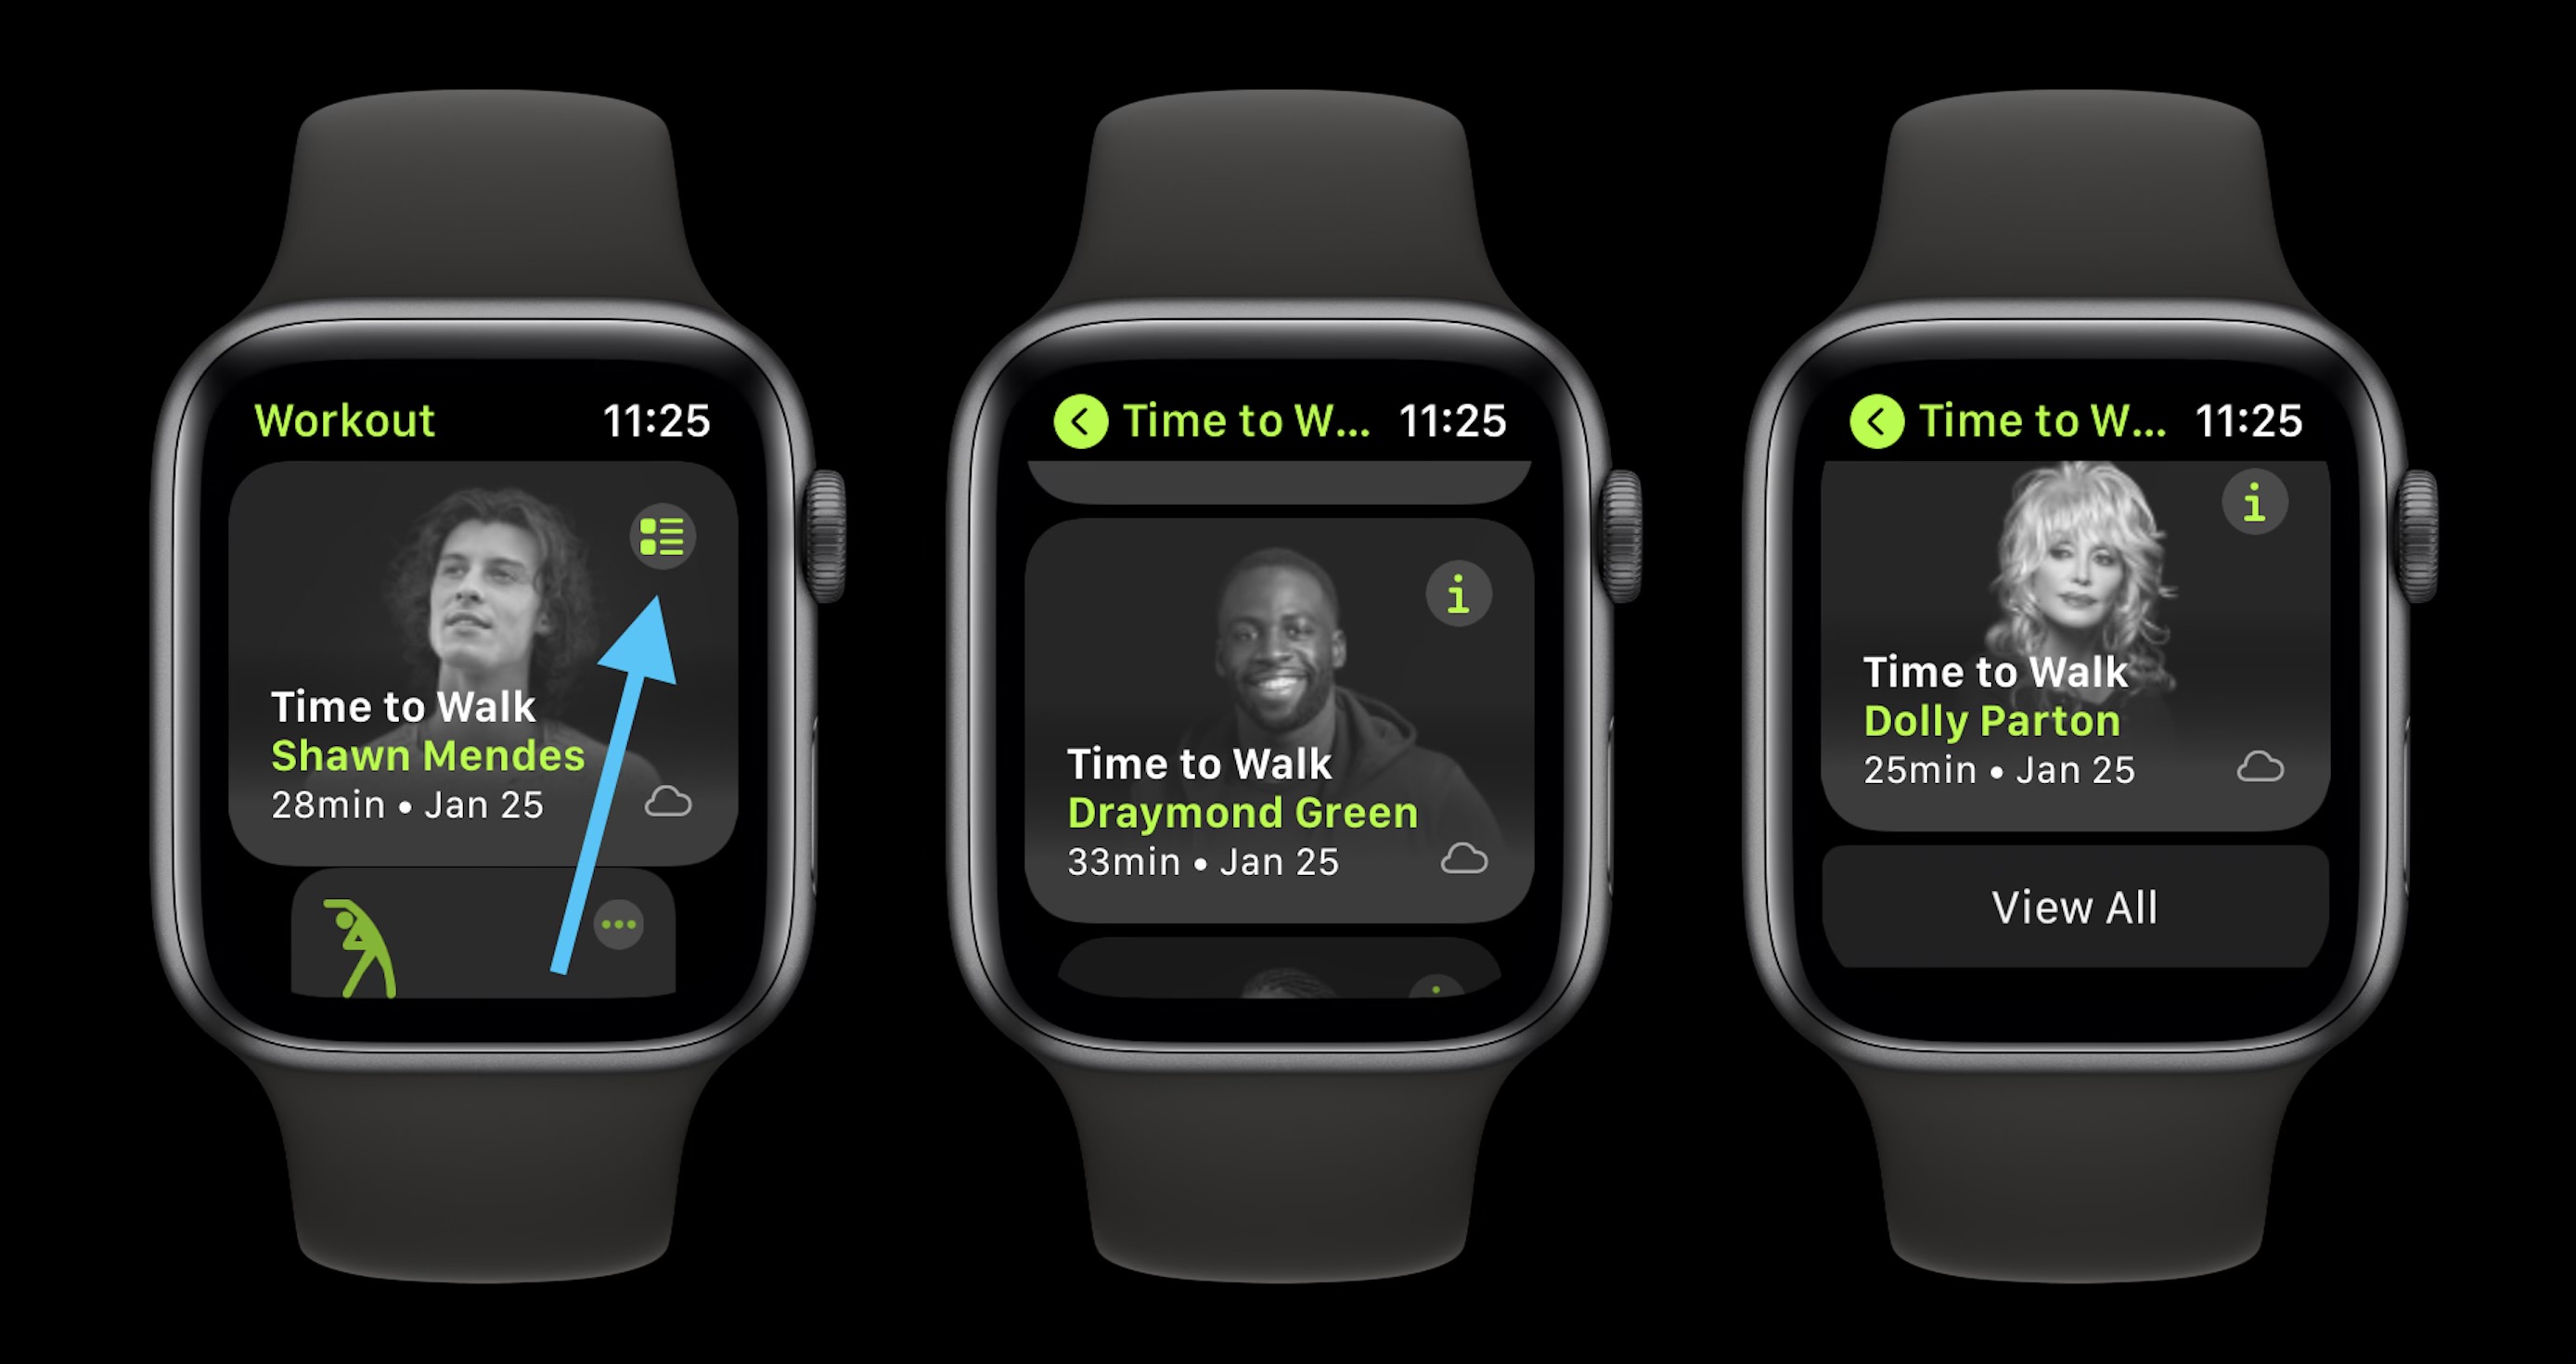 How to use Apple Watch Time to Walk, add/remove episodes 9to5Mac